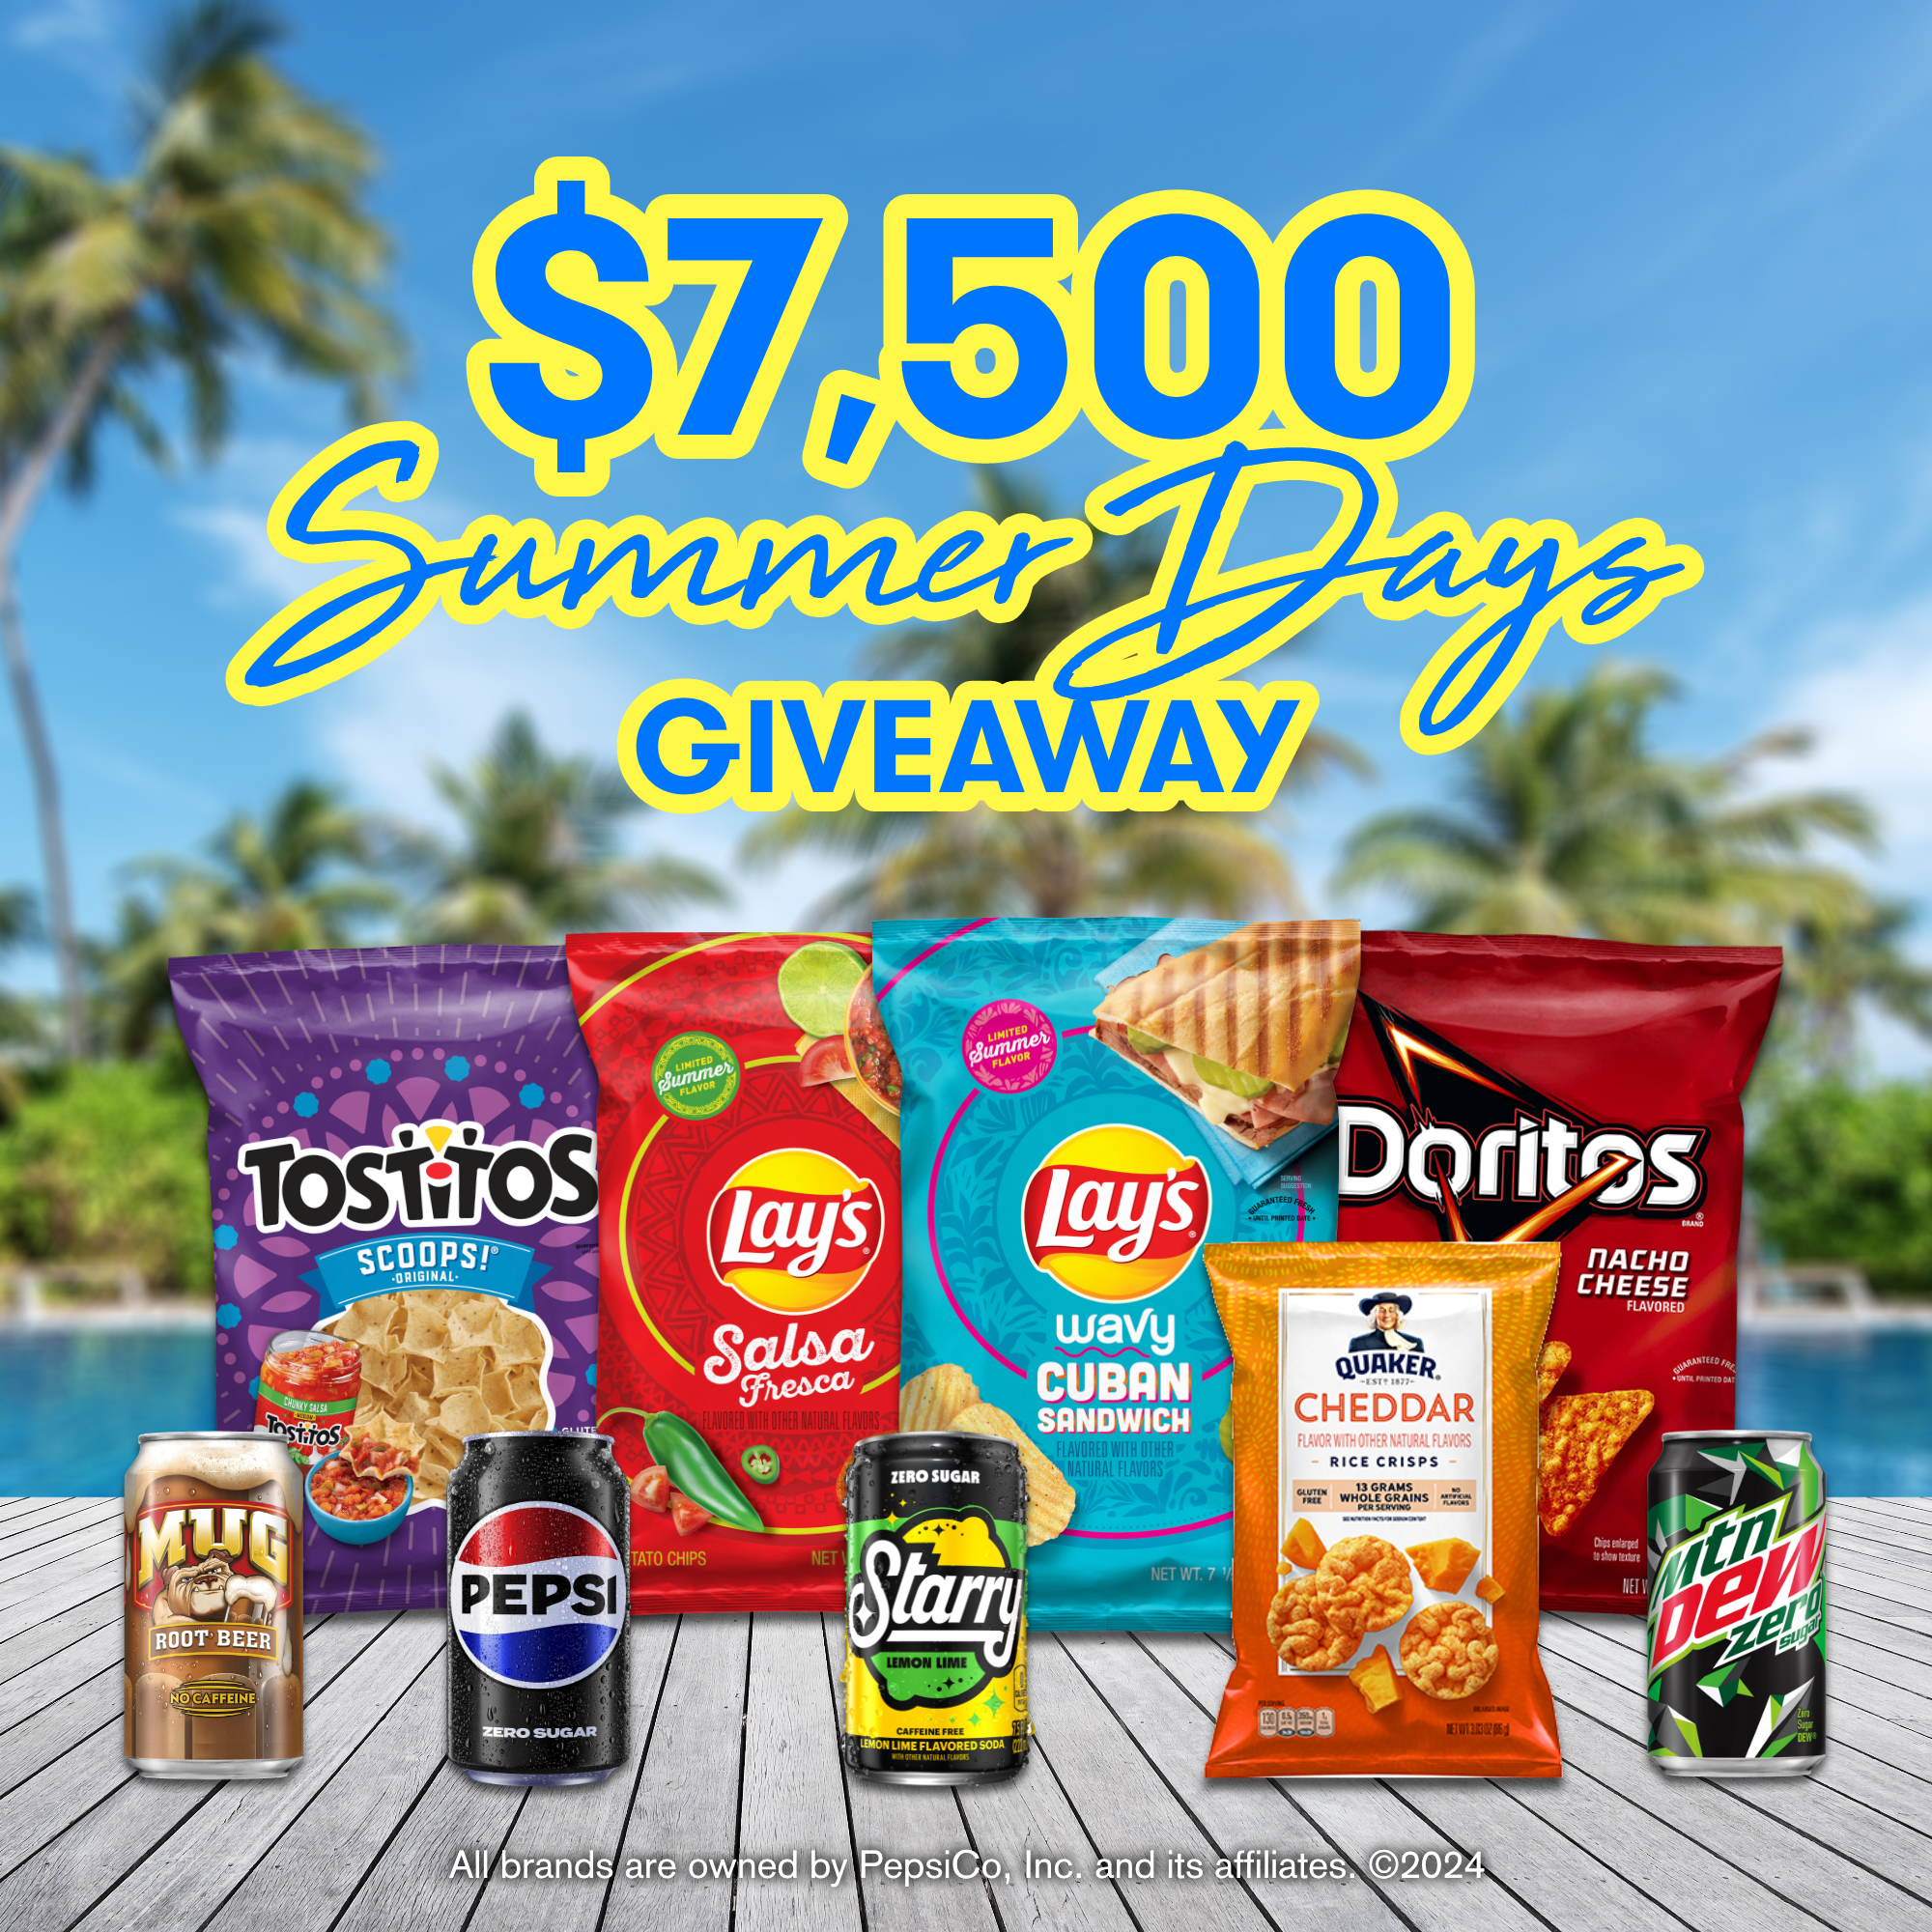 $7,500 Summer Days Giveaway